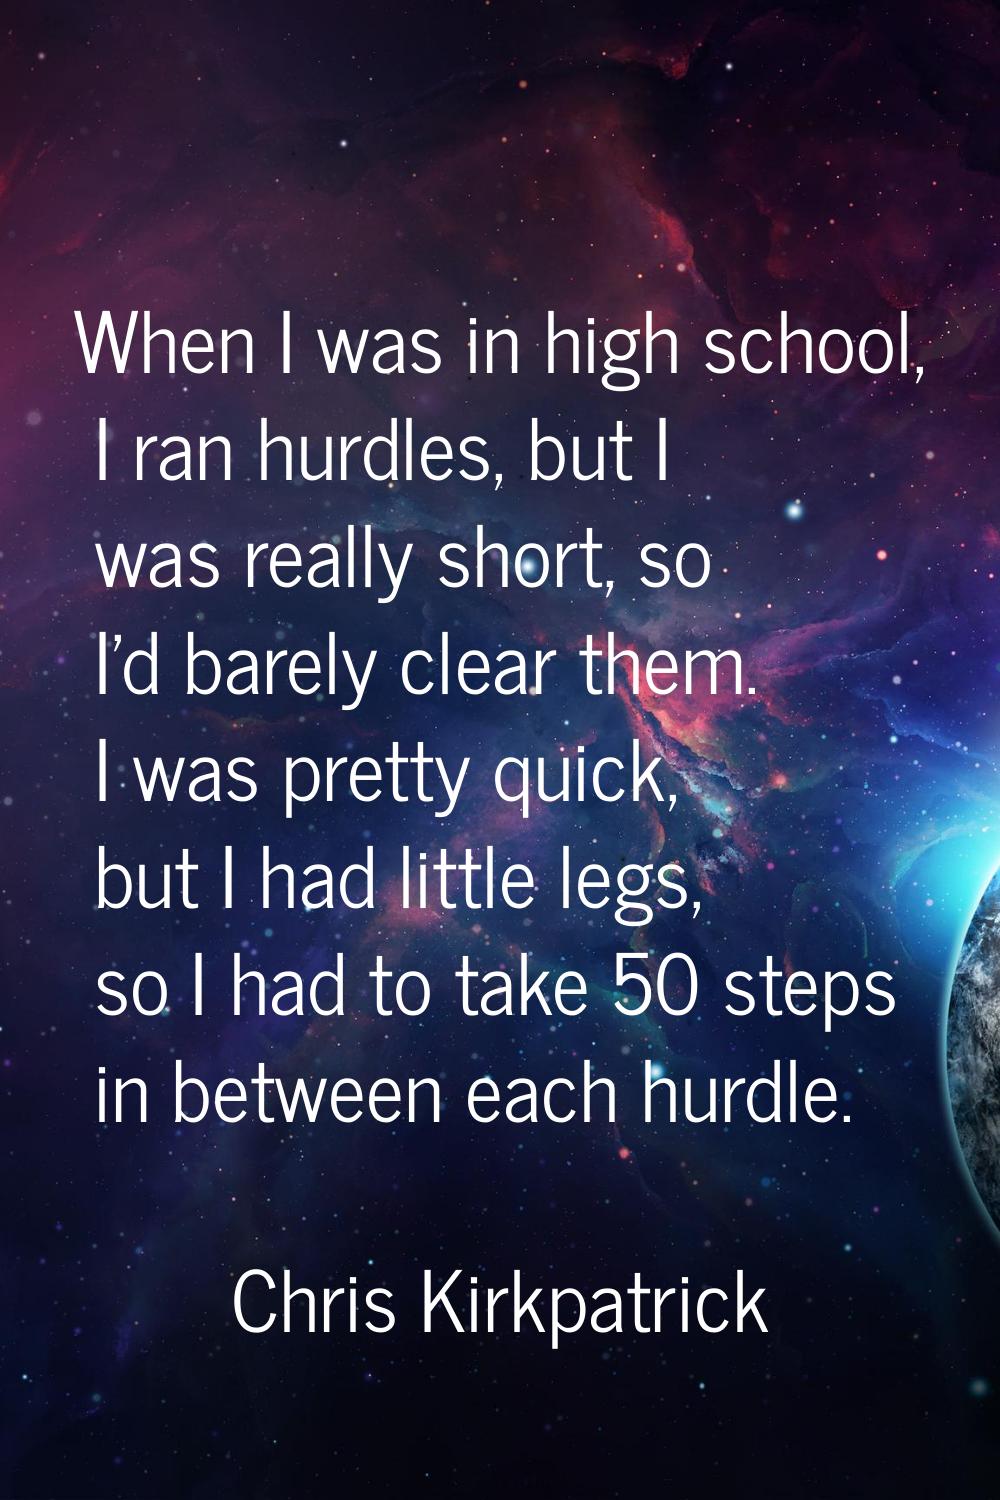 When I was in high school, I ran hurdles, but I was really short, so I'd barely clear them. I was p